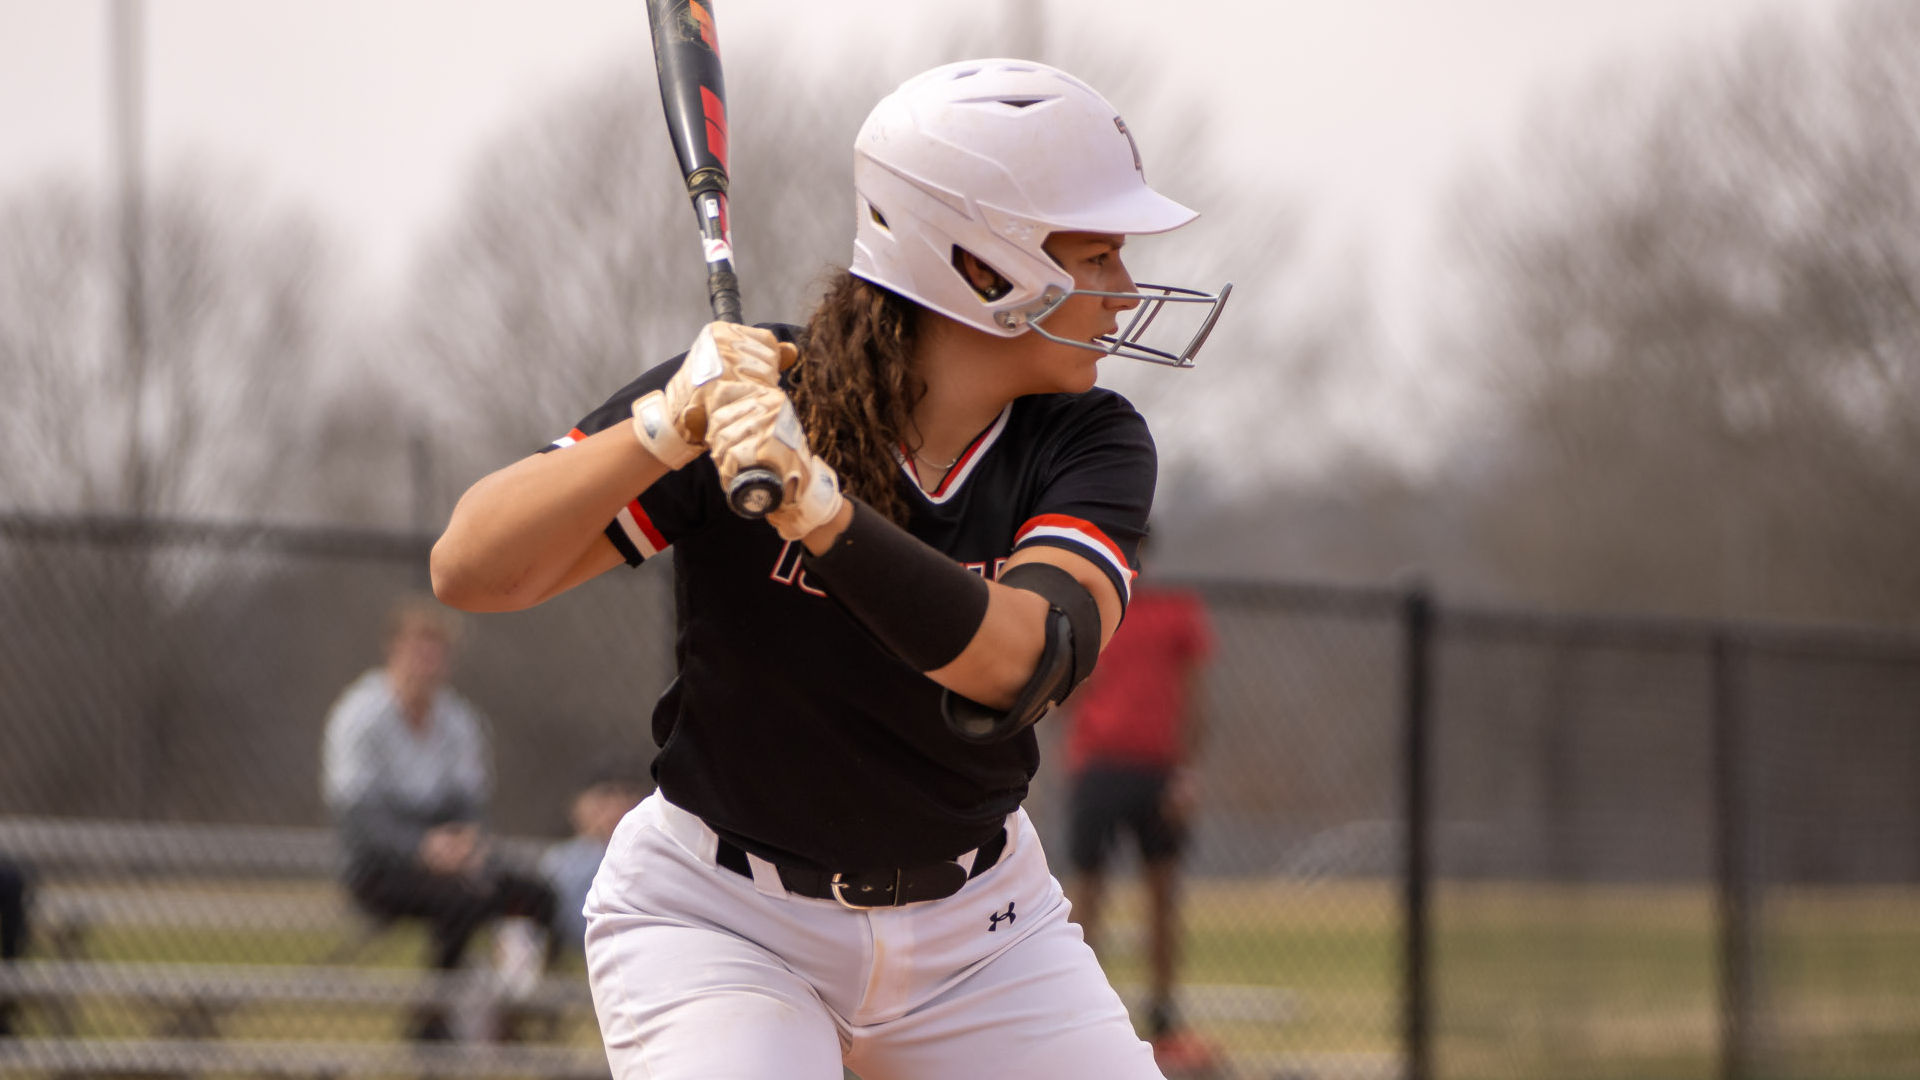 Gabi Nicholson went 6-of-9 on the day with eight RBI and a pair of home runs against Catawba.